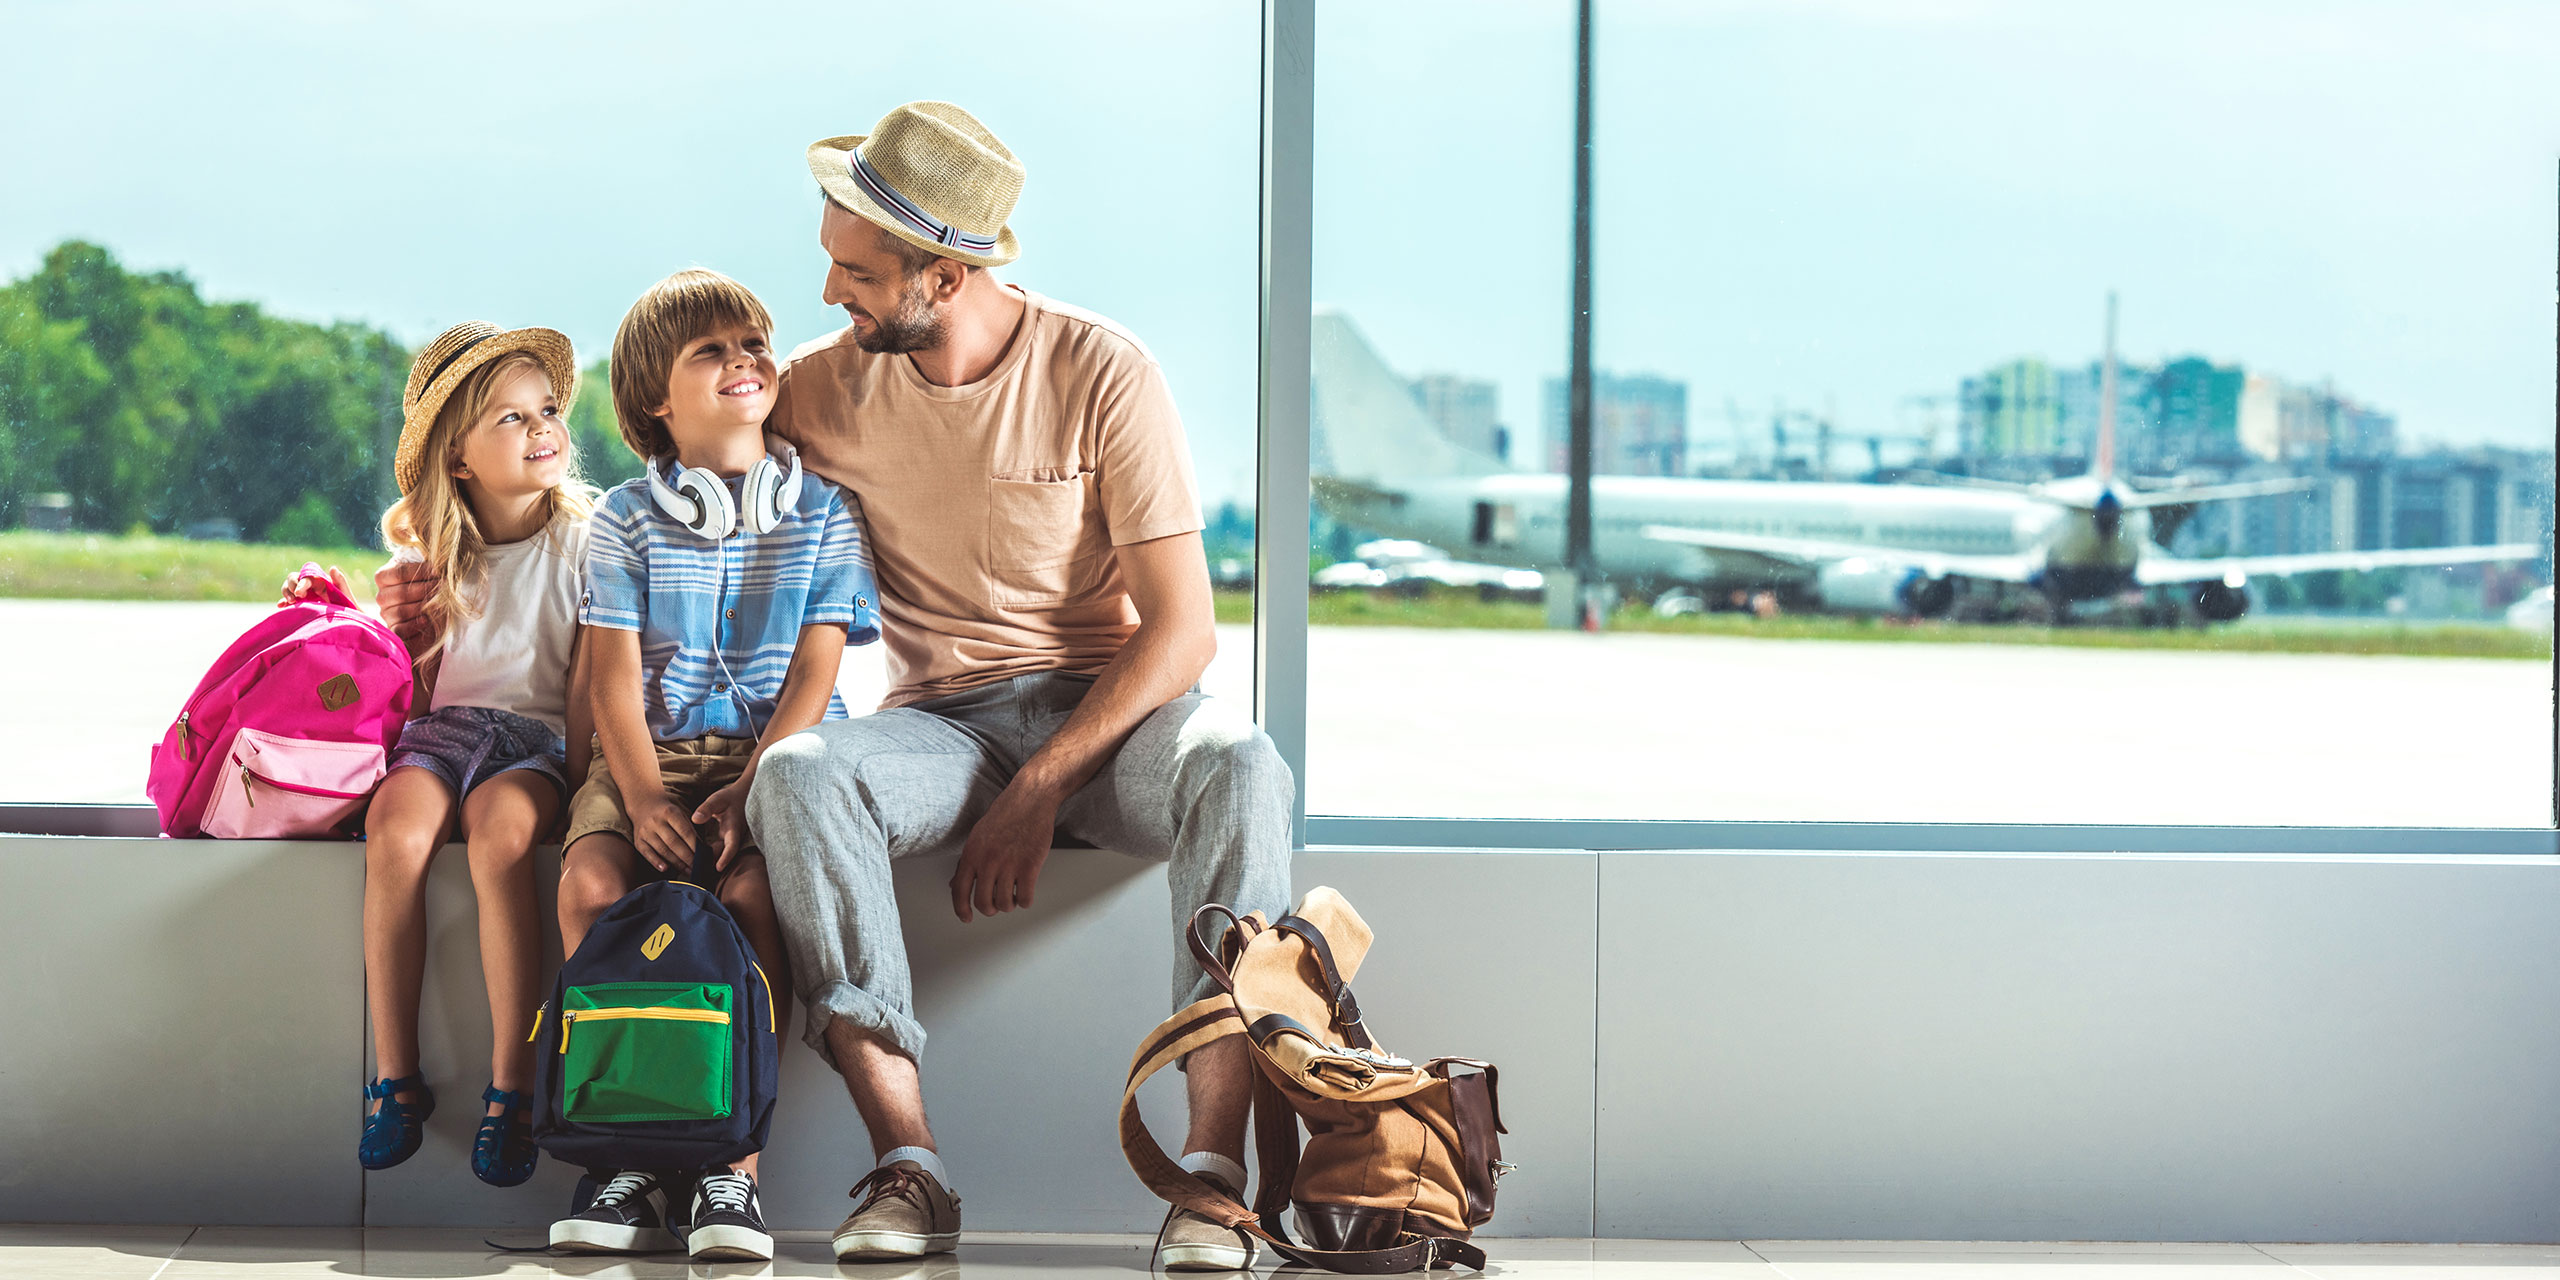 Father and Kids With Carry-On Bags at Airport; Courtesy of LightField Studios/Shutterstock.com